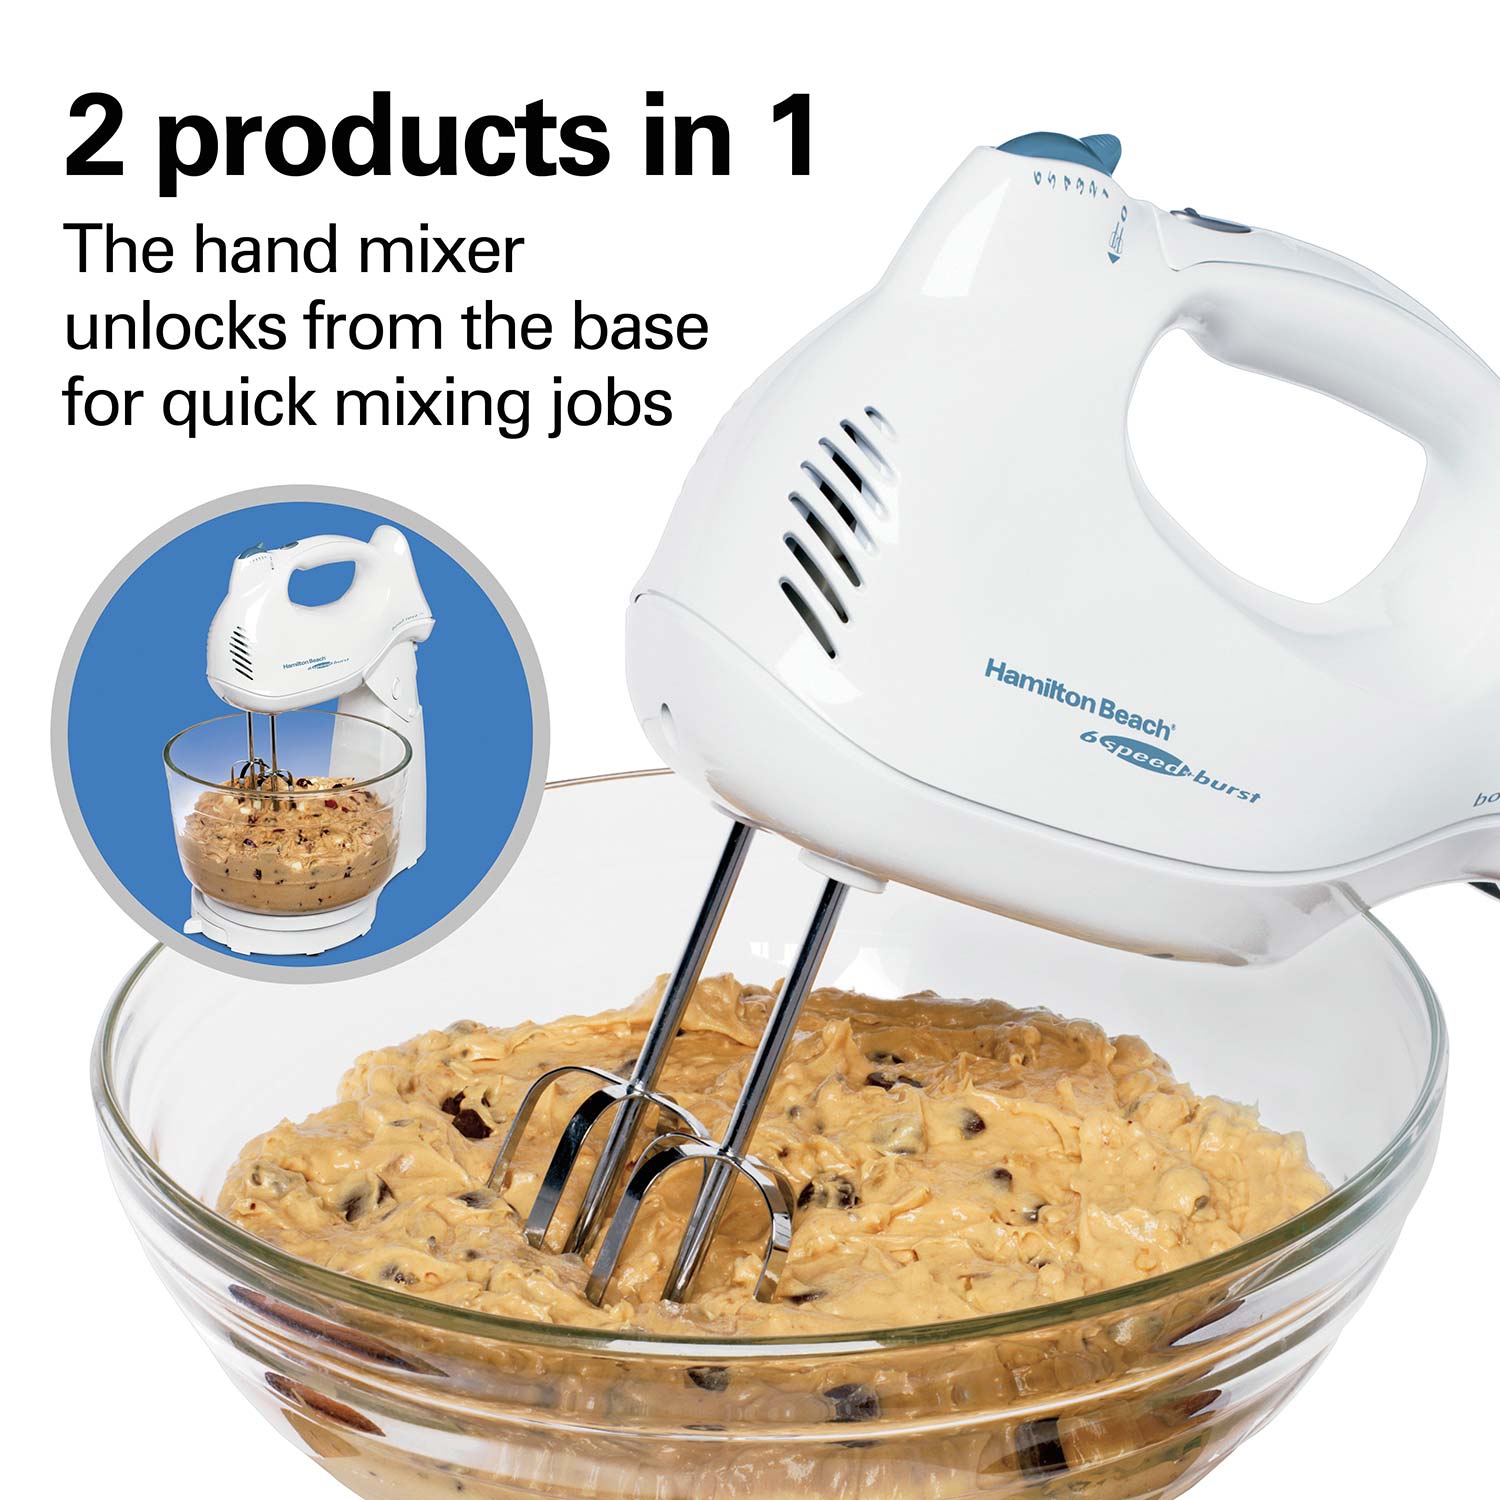 Hamilton Beach Brands Inc. 62695V Hamilton Beach Power Deluxe 6-Speed  Electric Hand Mixer with Snap-On Storage Case, QuickBurst, Beaters, Whisk,  Bowl Rest